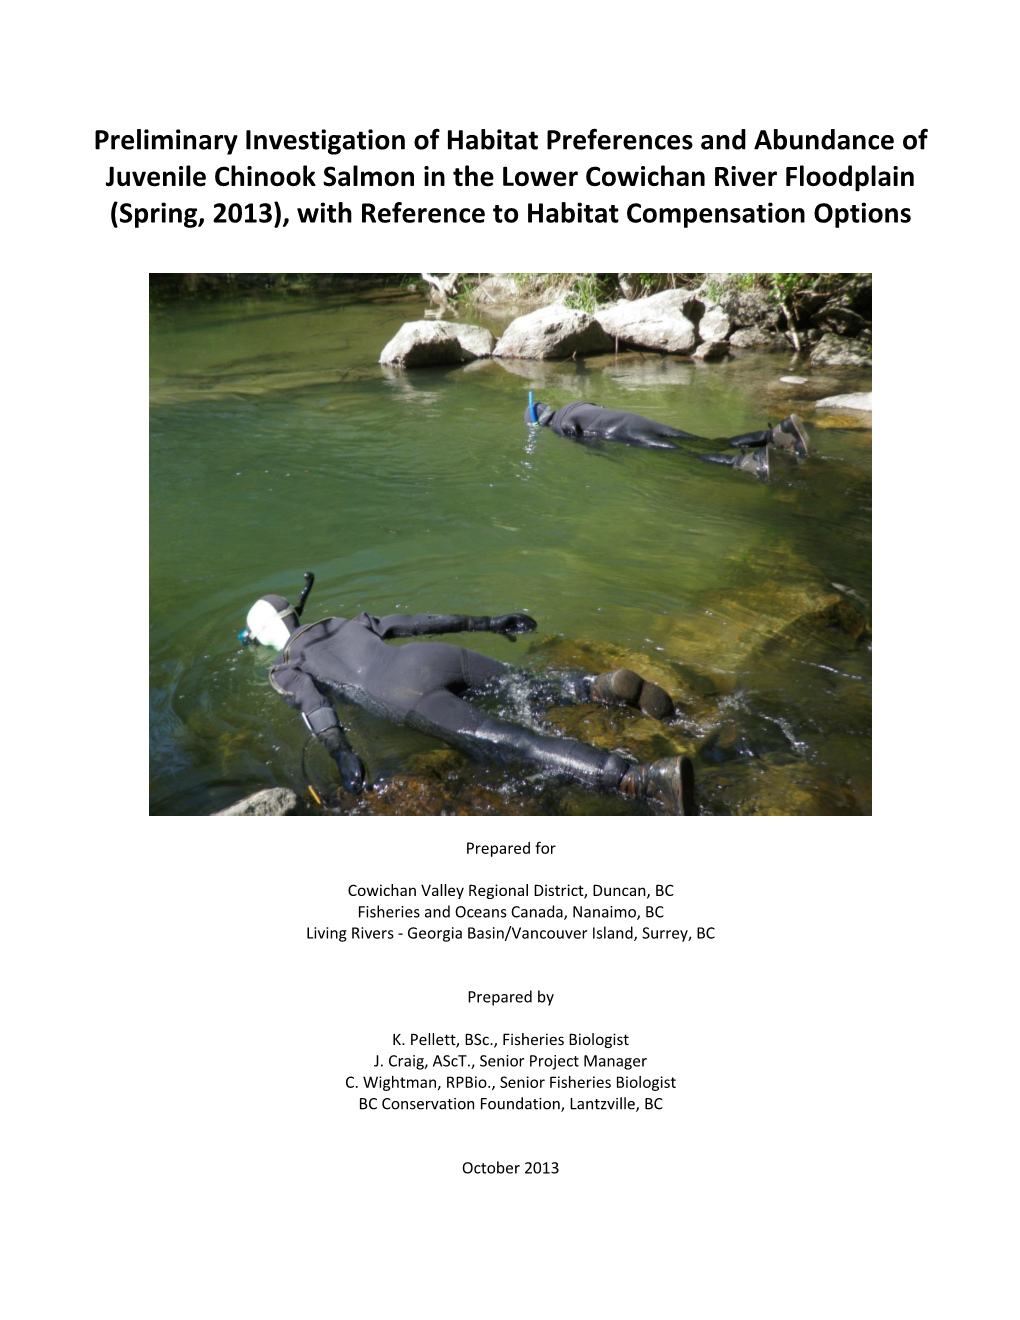 Preliminary Investigation of Habitat Preferences and Abundance of Juvenile Chinook Salmon in the Lower Cowichan River Floodplain